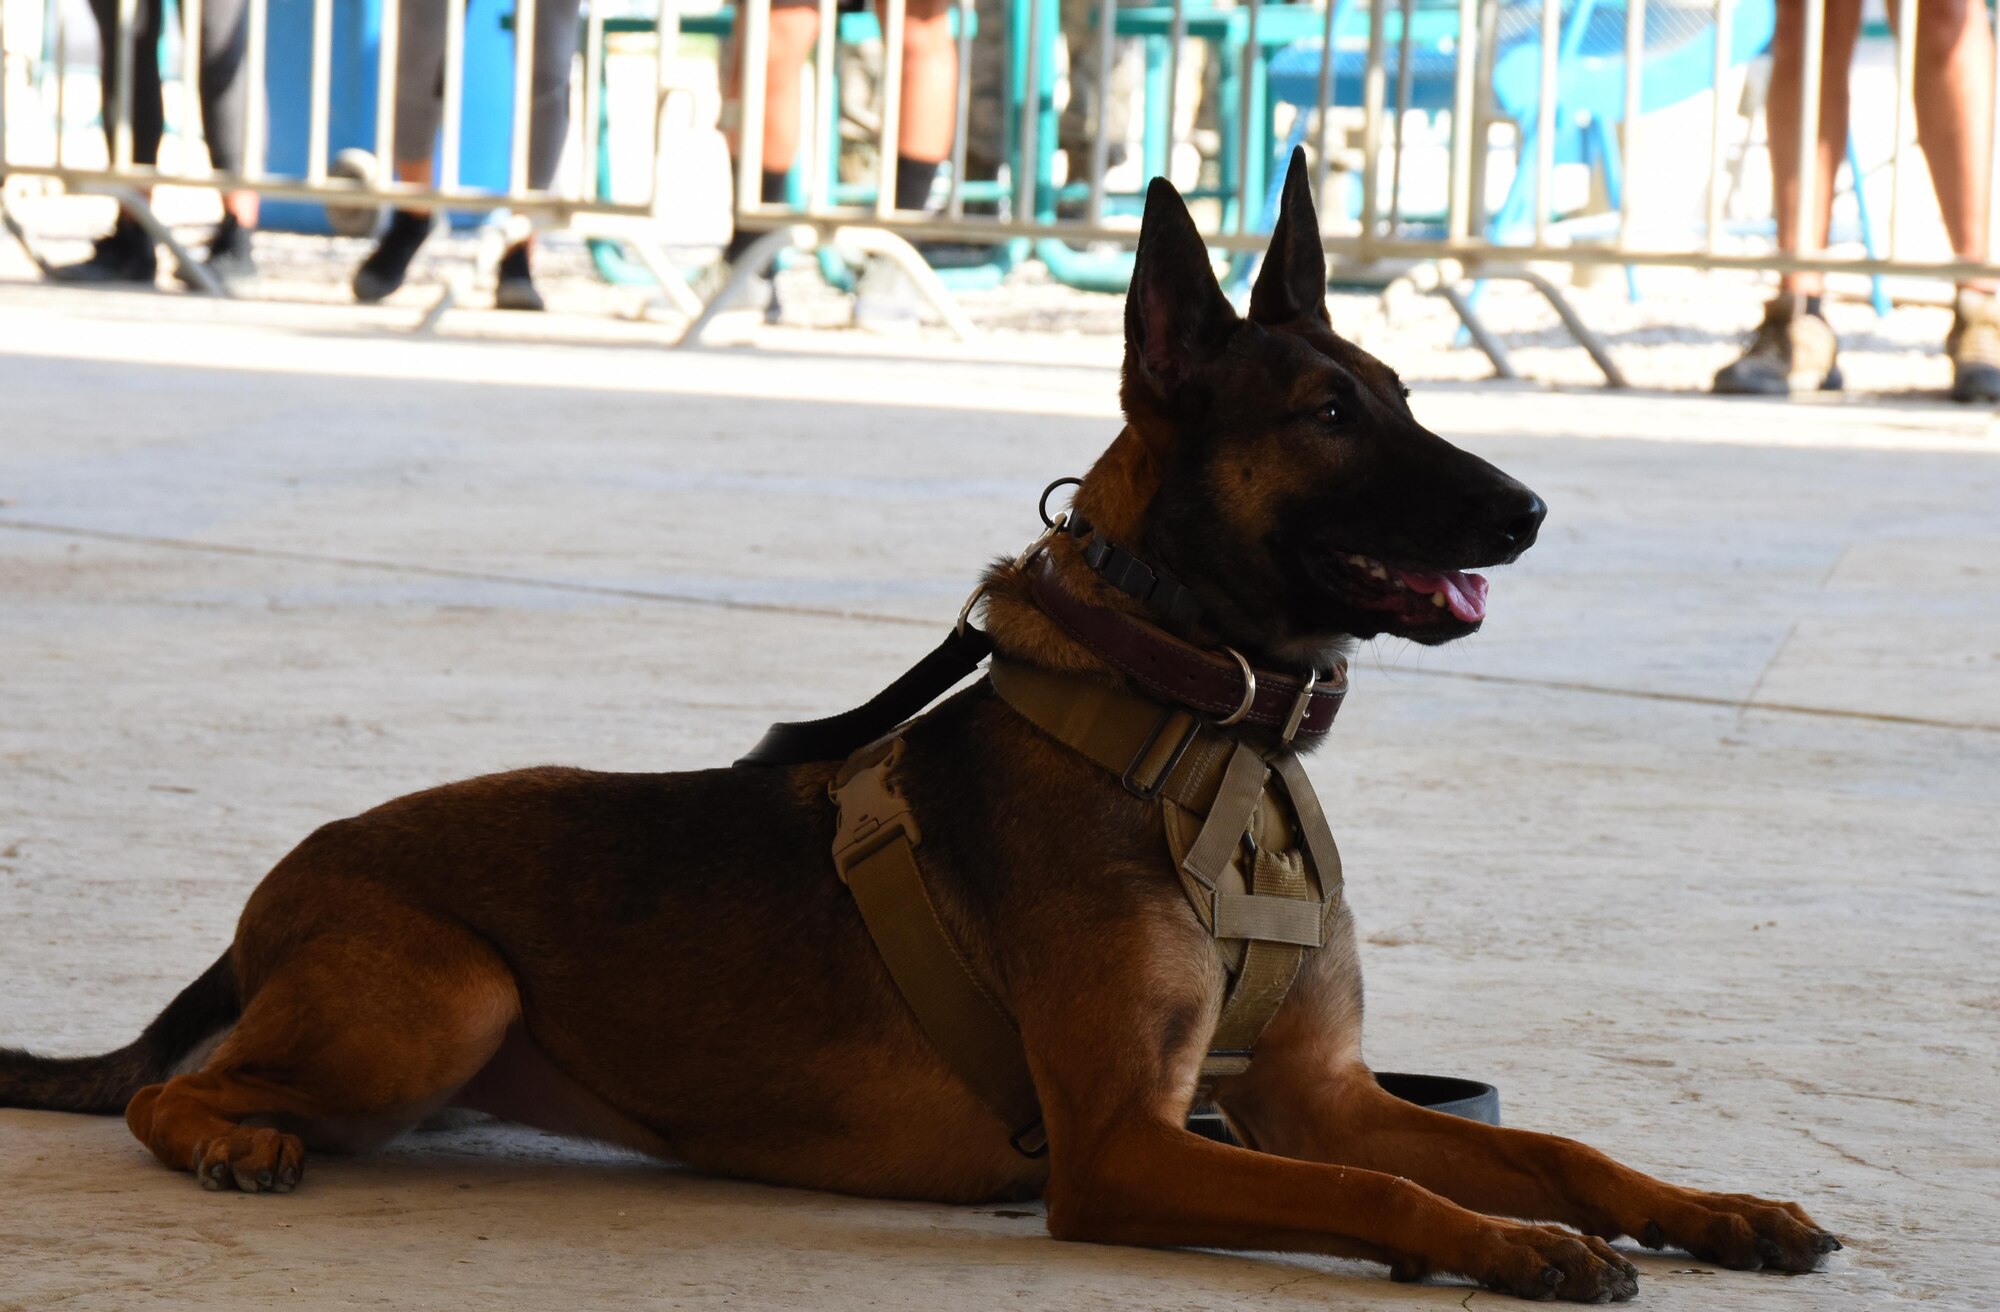 Oopal, a U.S. Air Force military working dog with the 379th Expeditionary Security Forces Squadron MWD section, waits for instruction from her handler during a Veterans Day MWD demonstration at Al Udeid Air Base, Qatar, Nov. 11, 2016. The double letter spelling in a military working dog’s name indicates they were born and raised in a Department of Defense program operated in the U.S. (U.S. Air Force photo by Senior Airman Cynthia A. Innocenti)